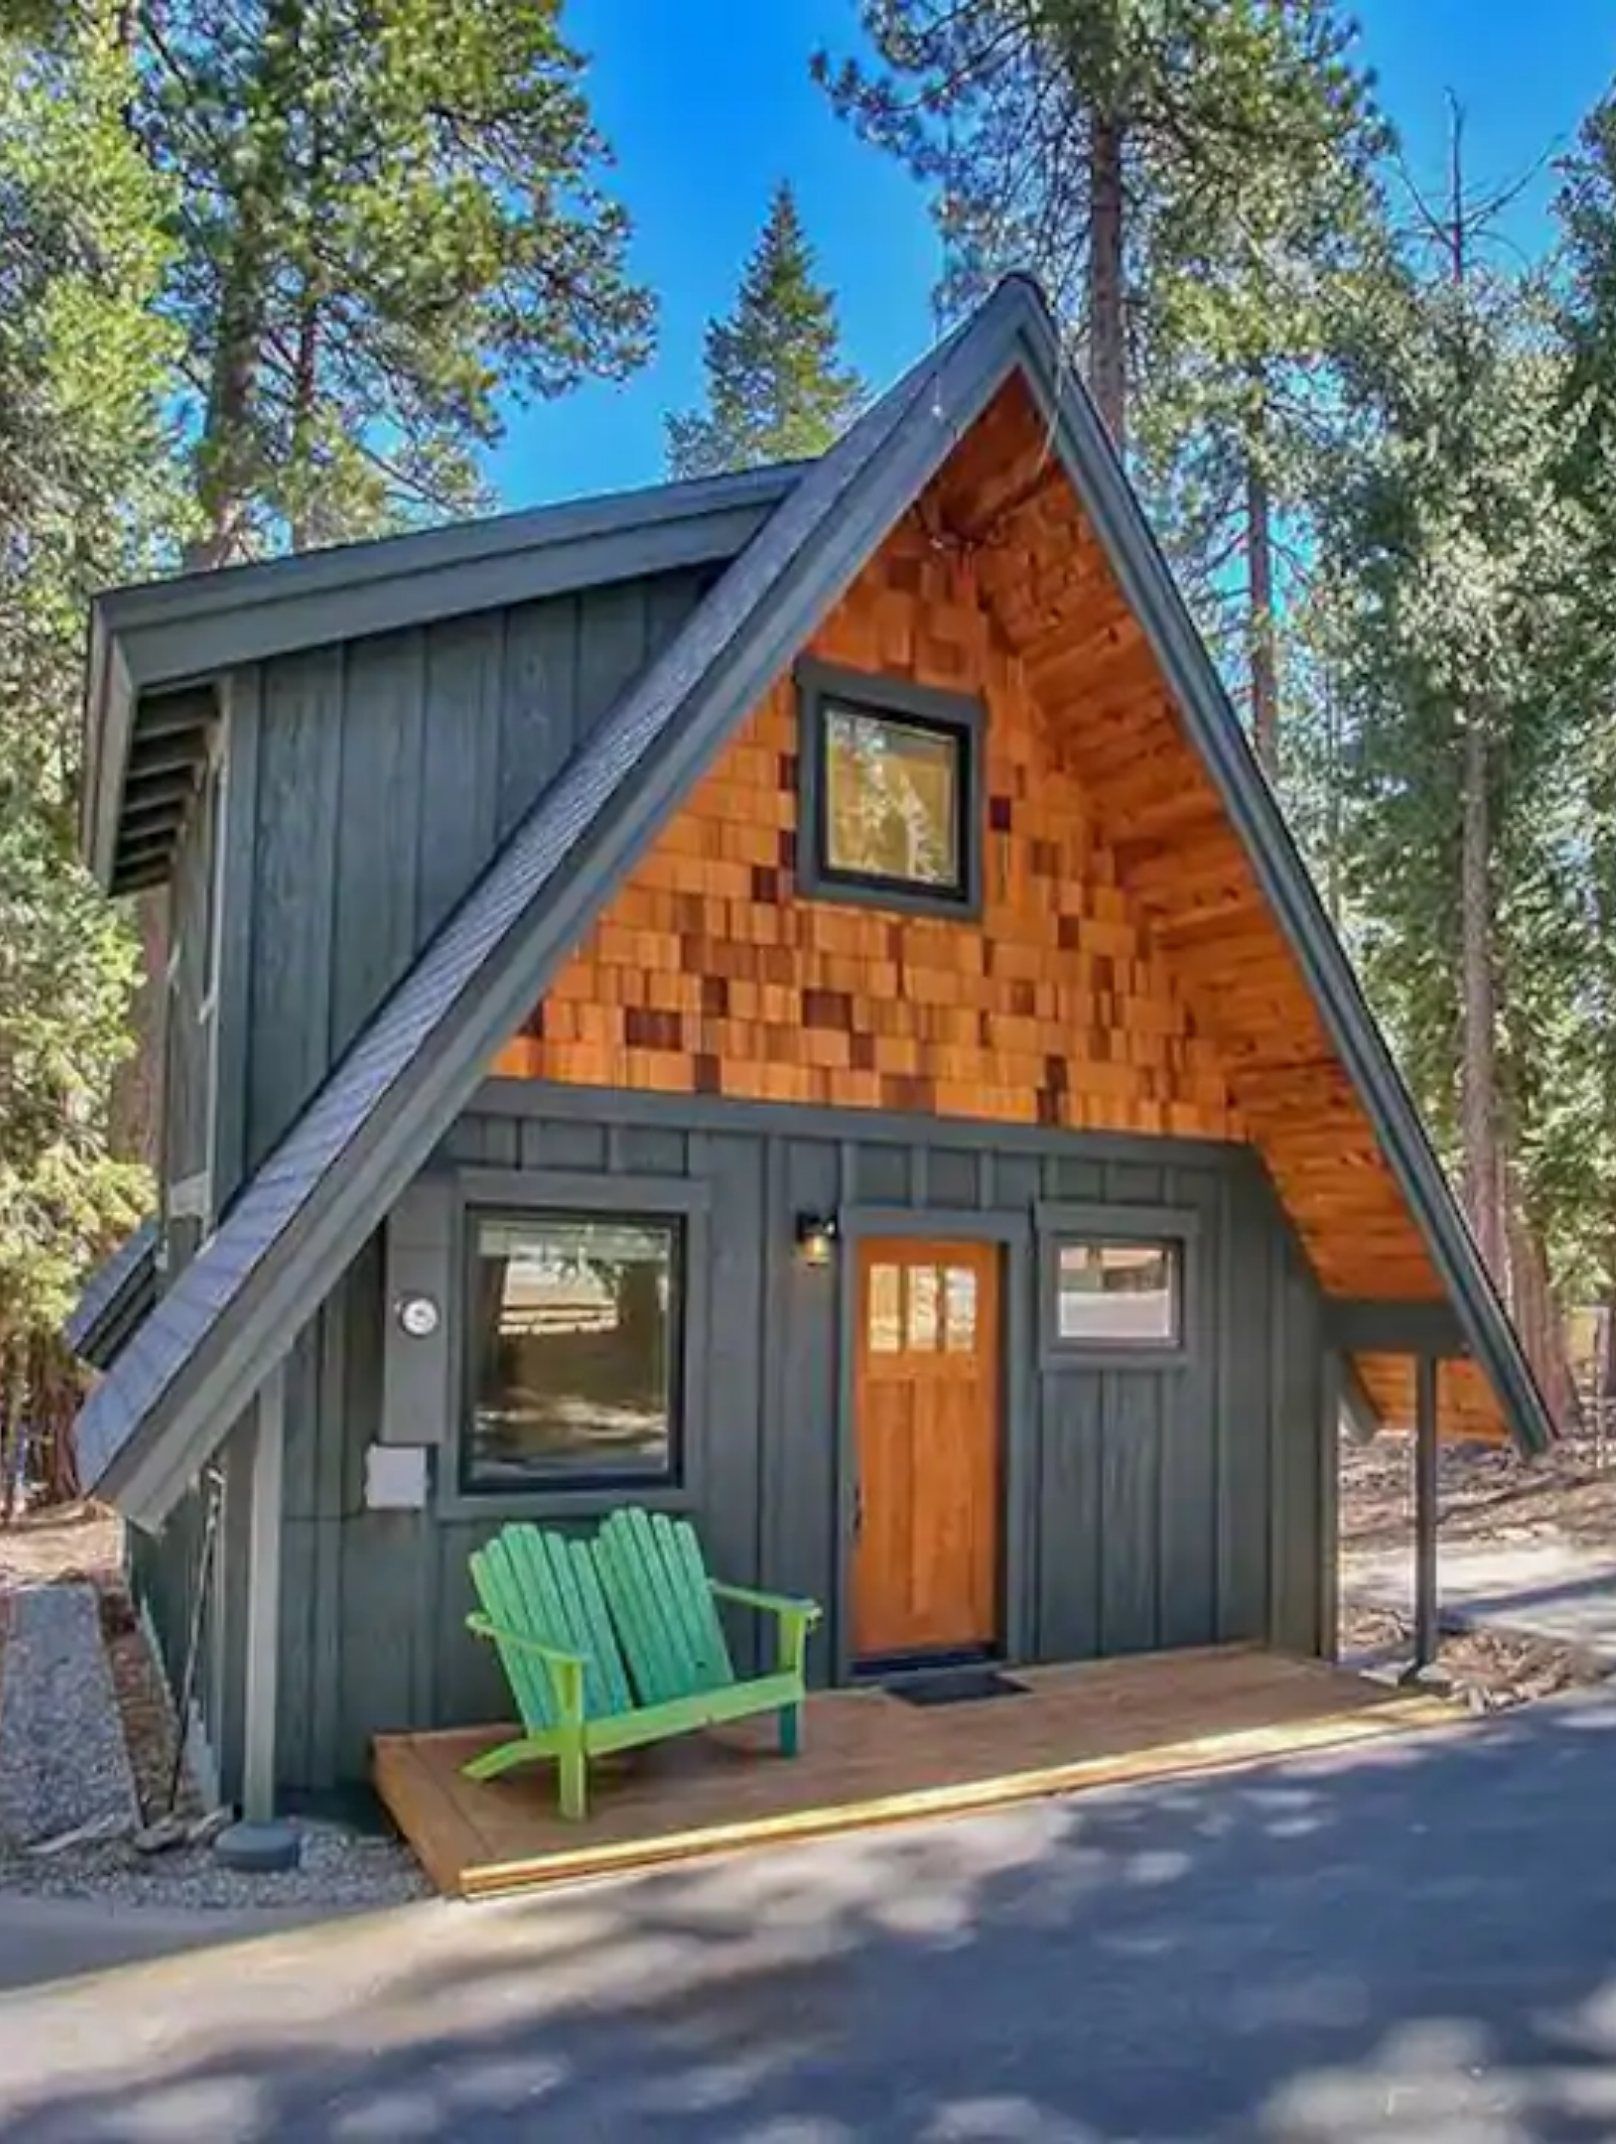 Airbnbs in the Western United States